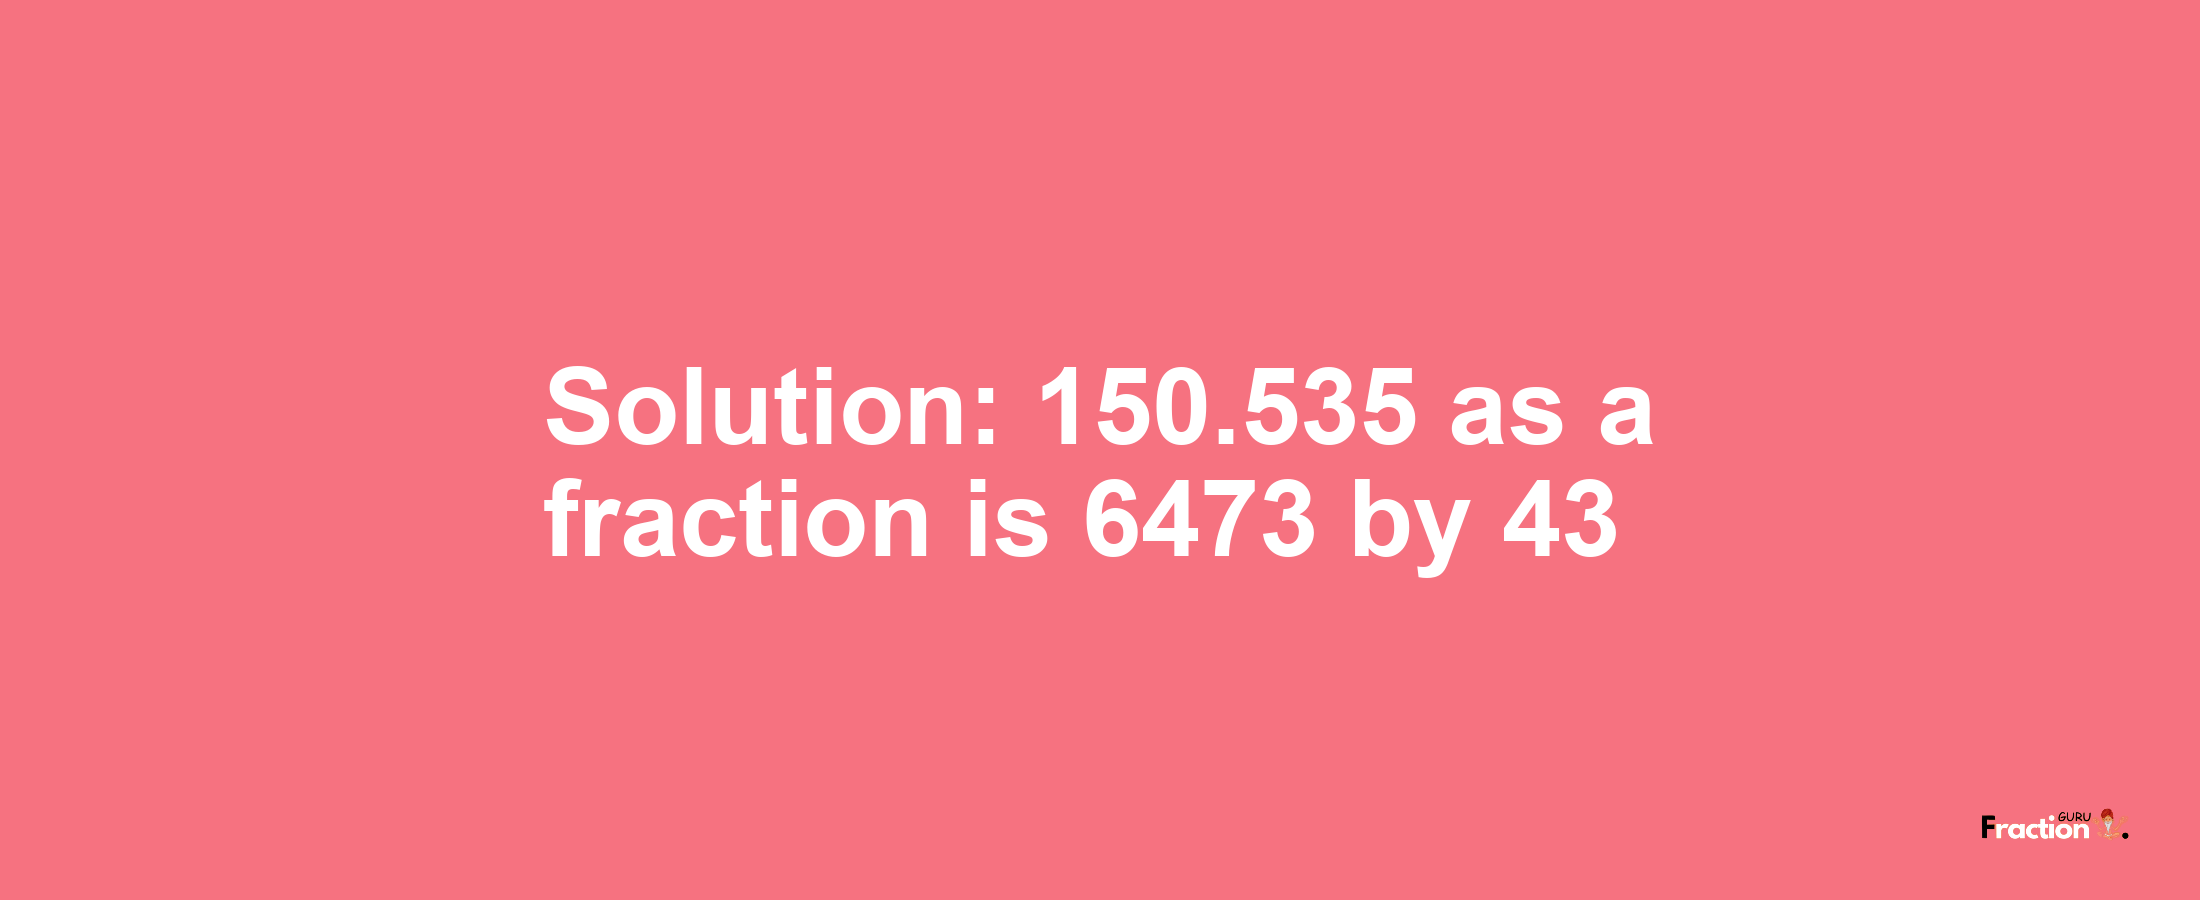 Solution:150.535 as a fraction is 6473/43